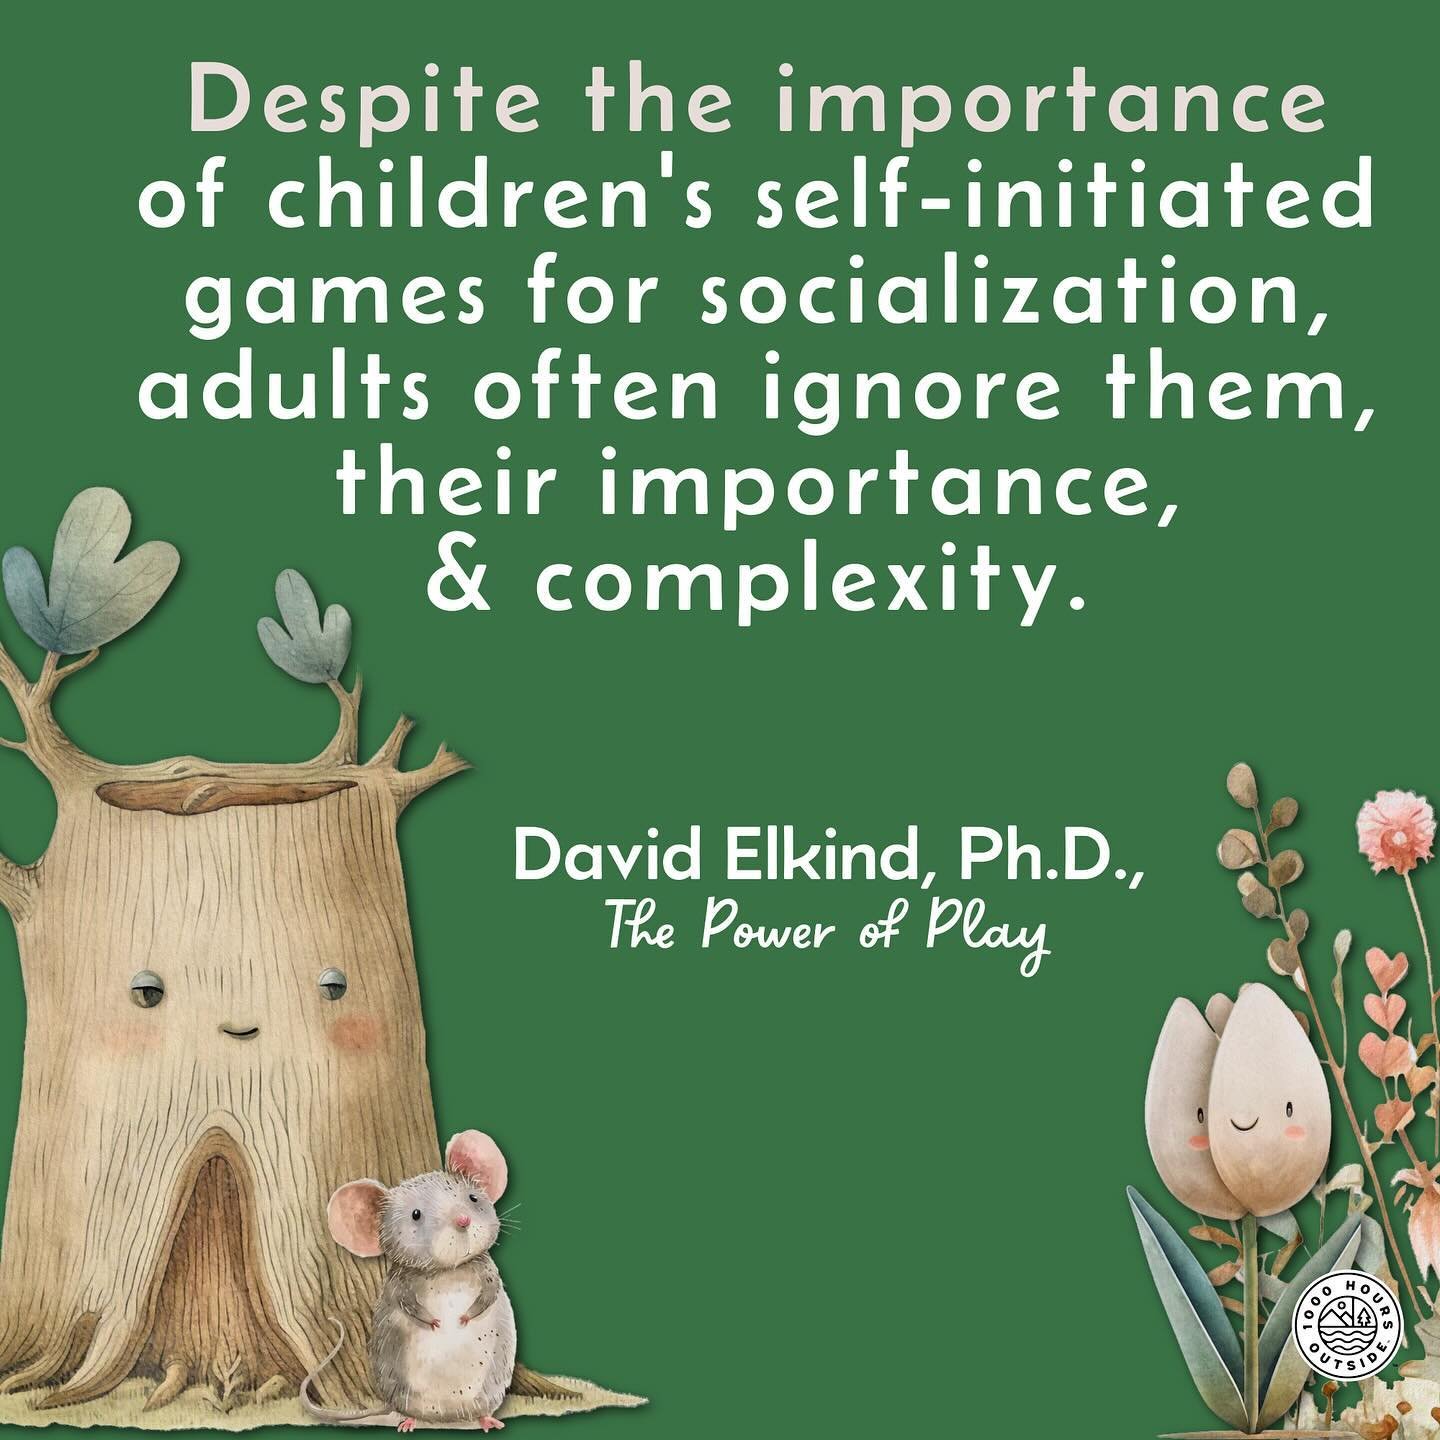 &hearts;️

A good little reminder

#1000hoursoutside #davidelkind #thepowerofplay